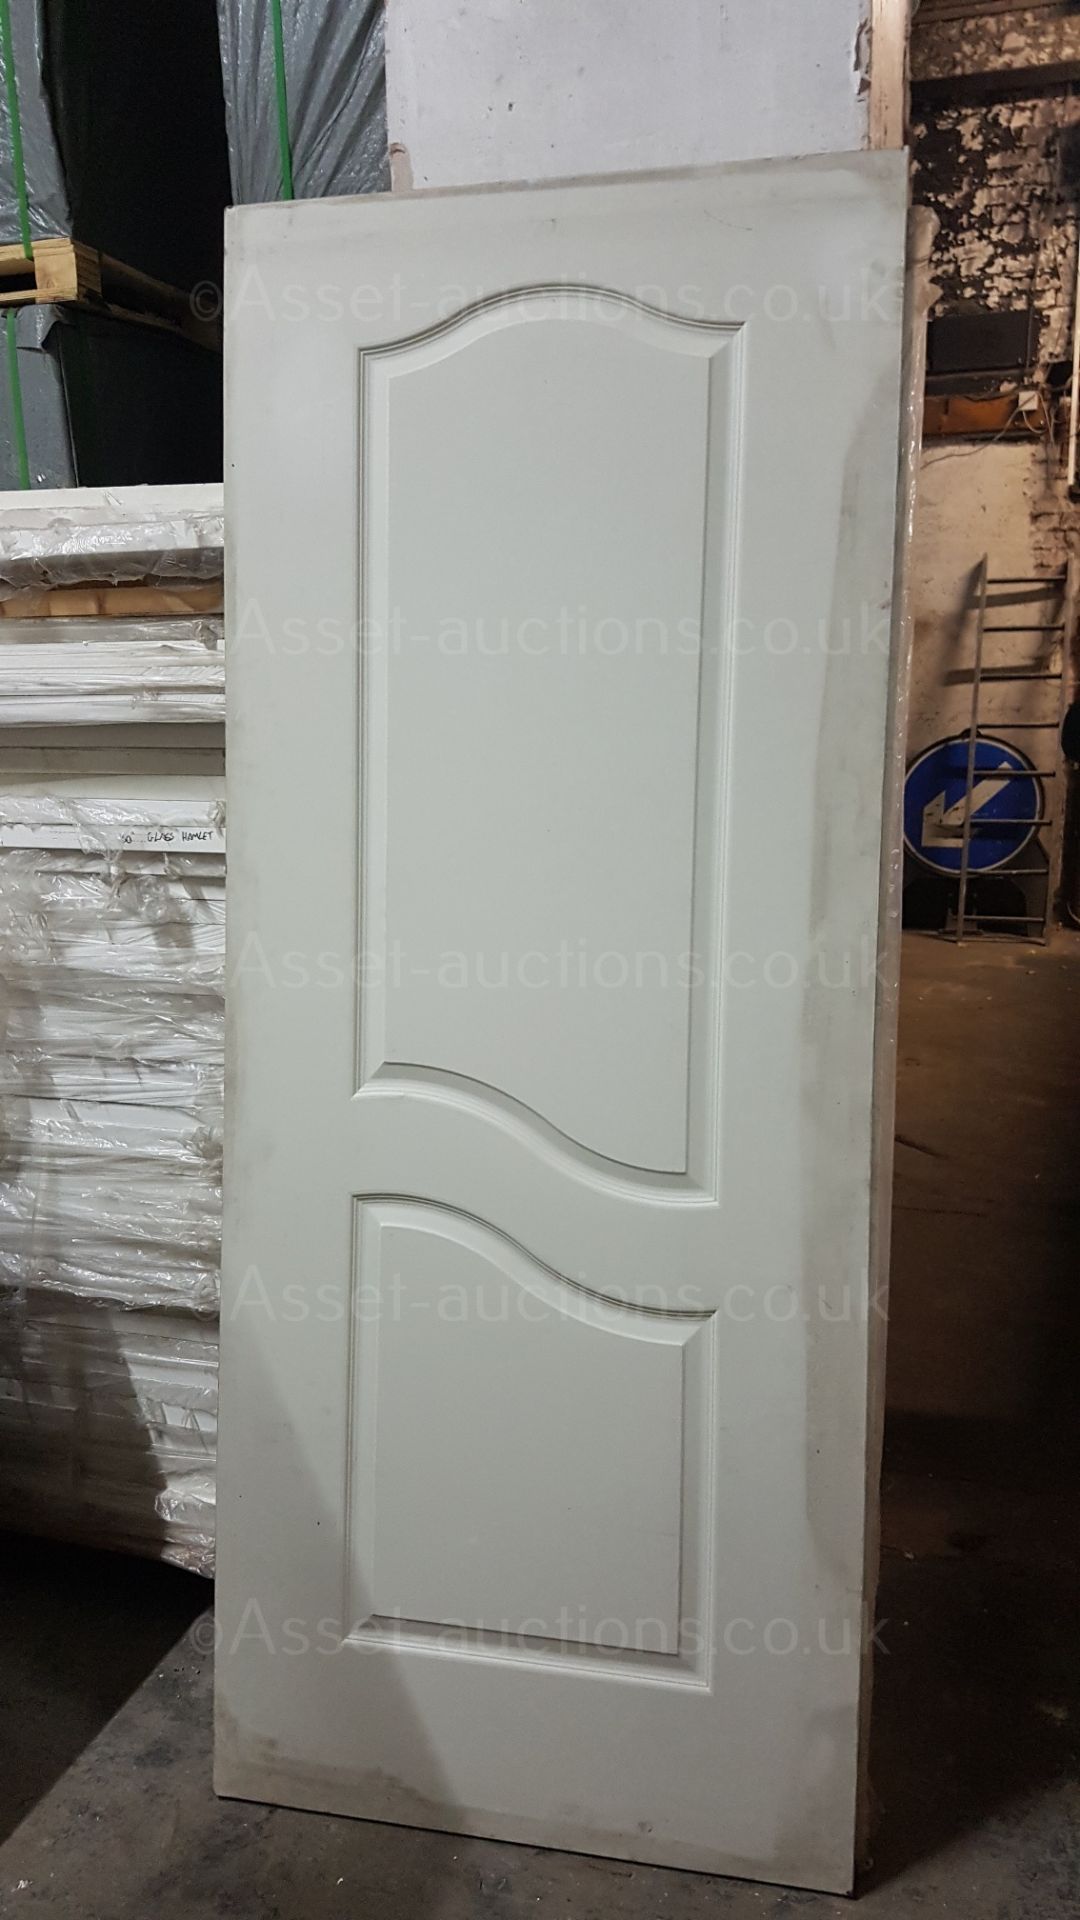 10 x DOORS, SELECTION OF DIFFERENT SIZES AND DESIGNS *NO VAT* - Image 2 of 4